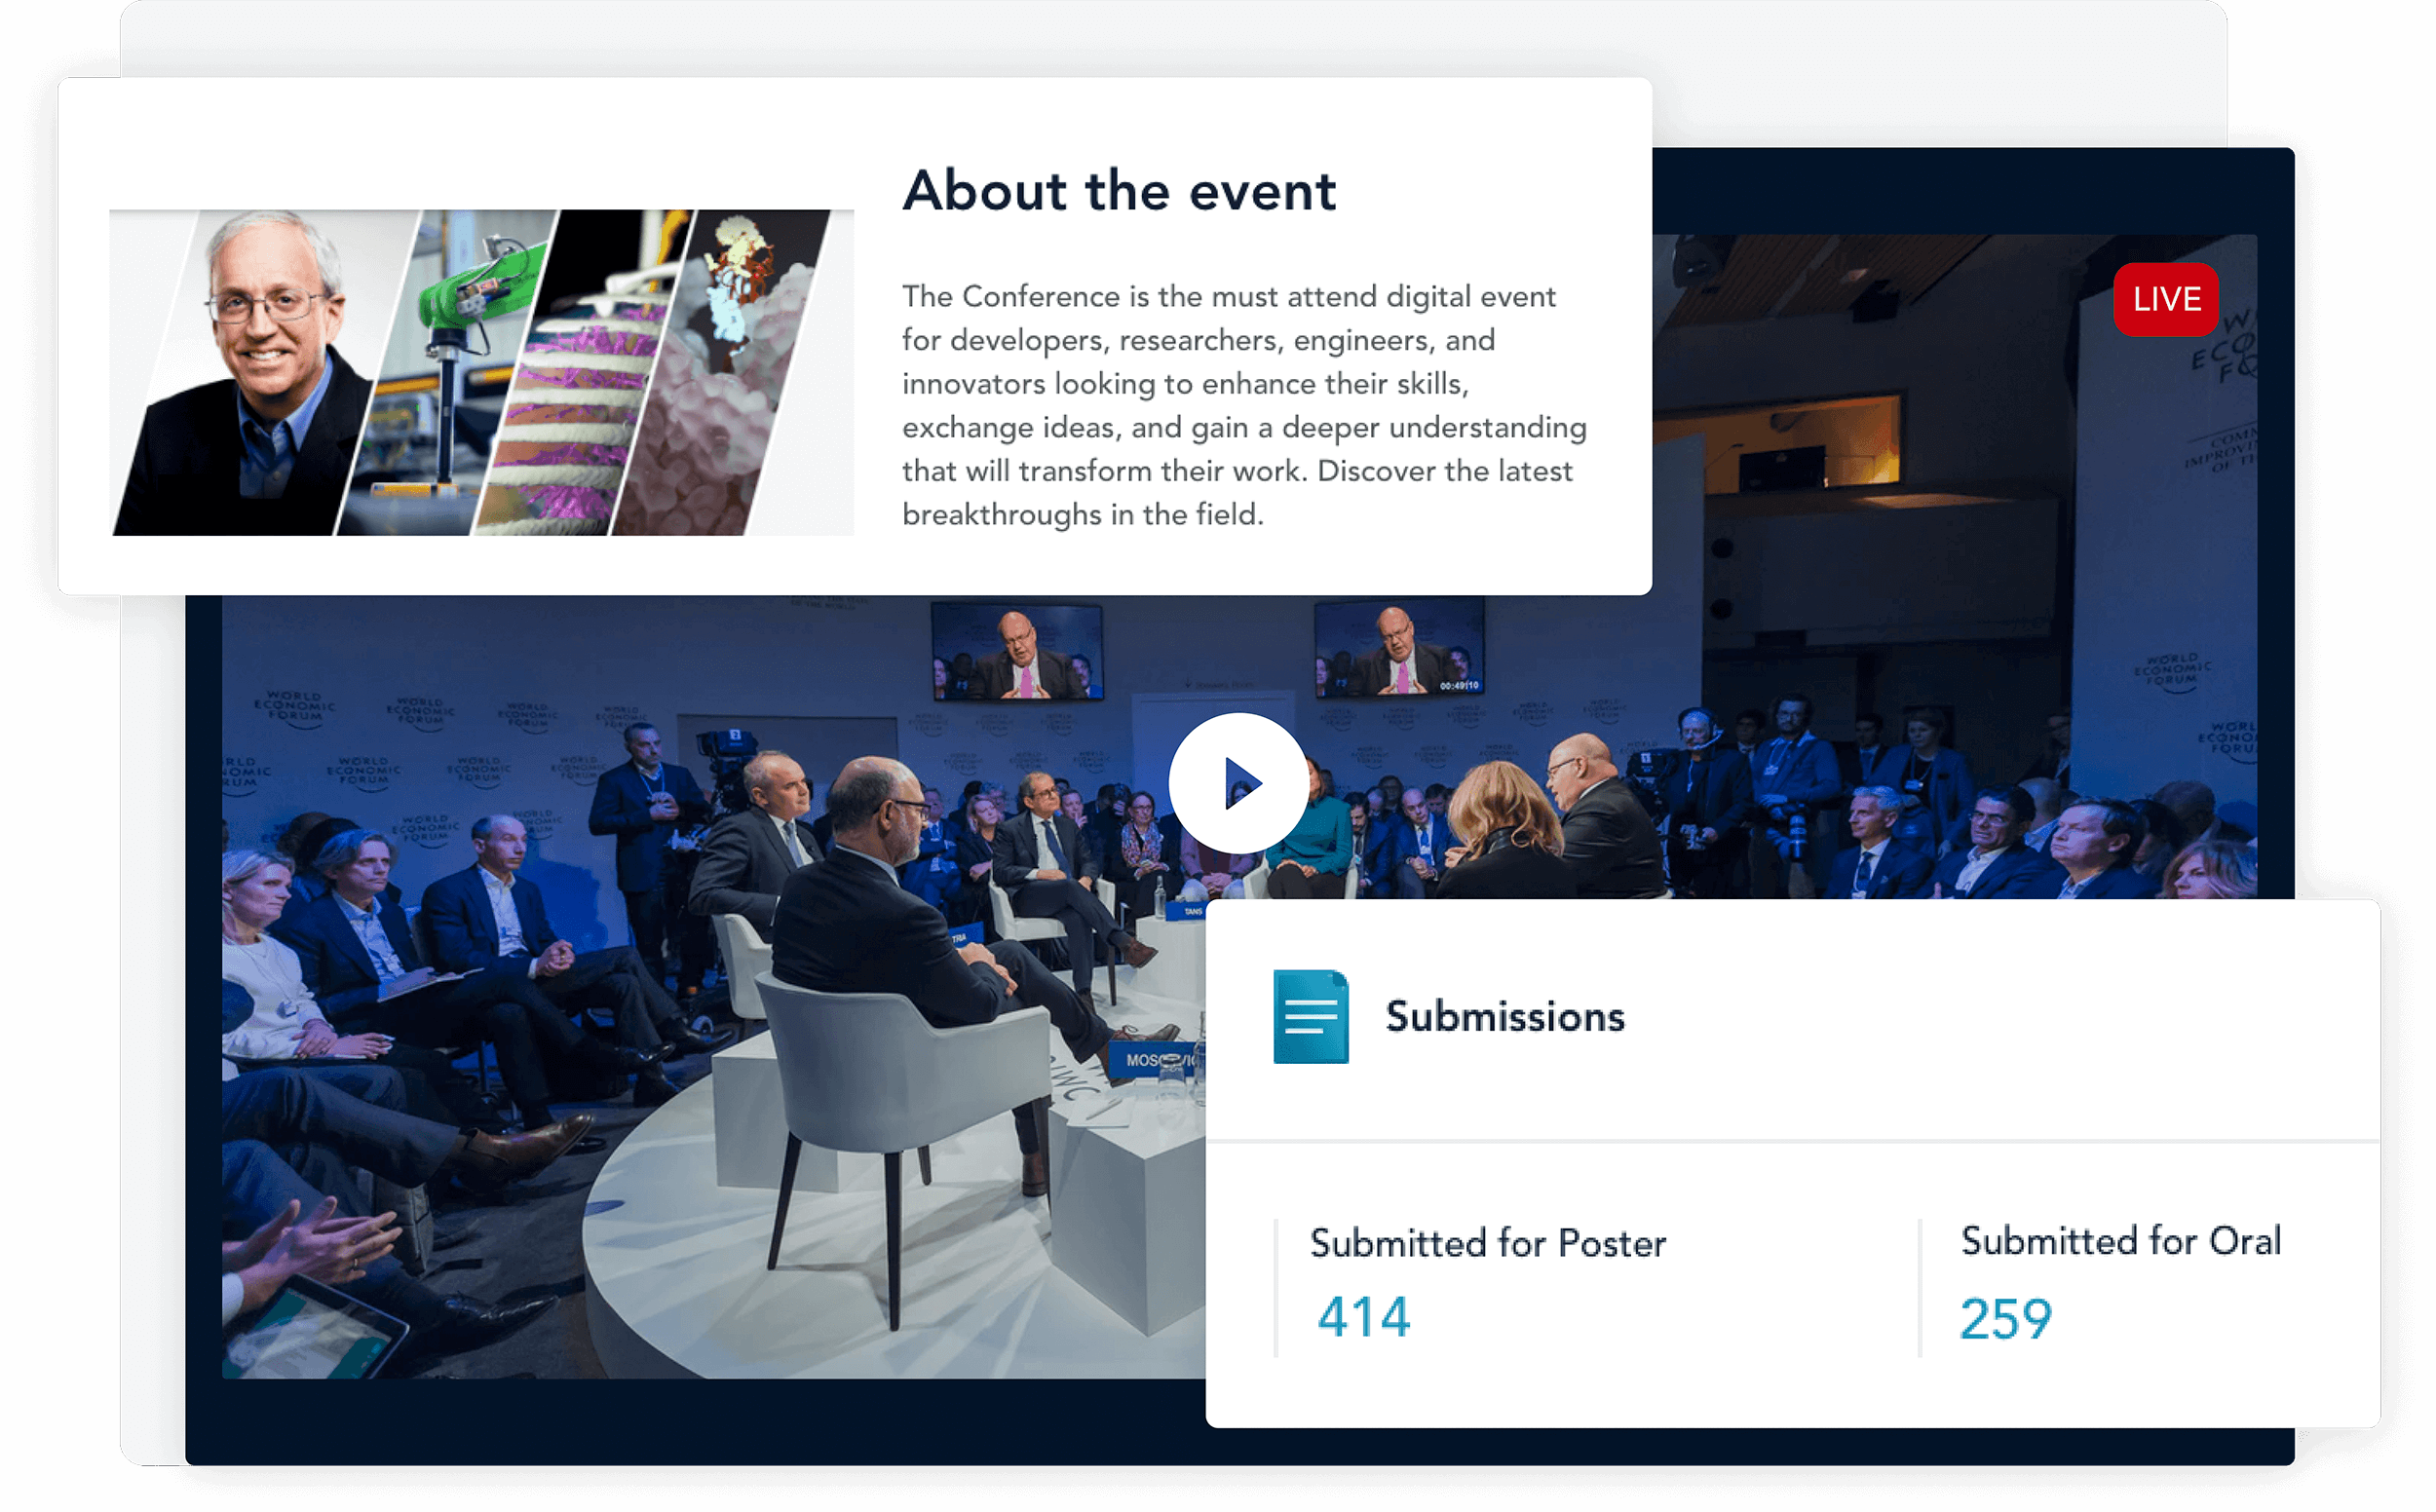 Highlight key moments of the event and live stream presentations